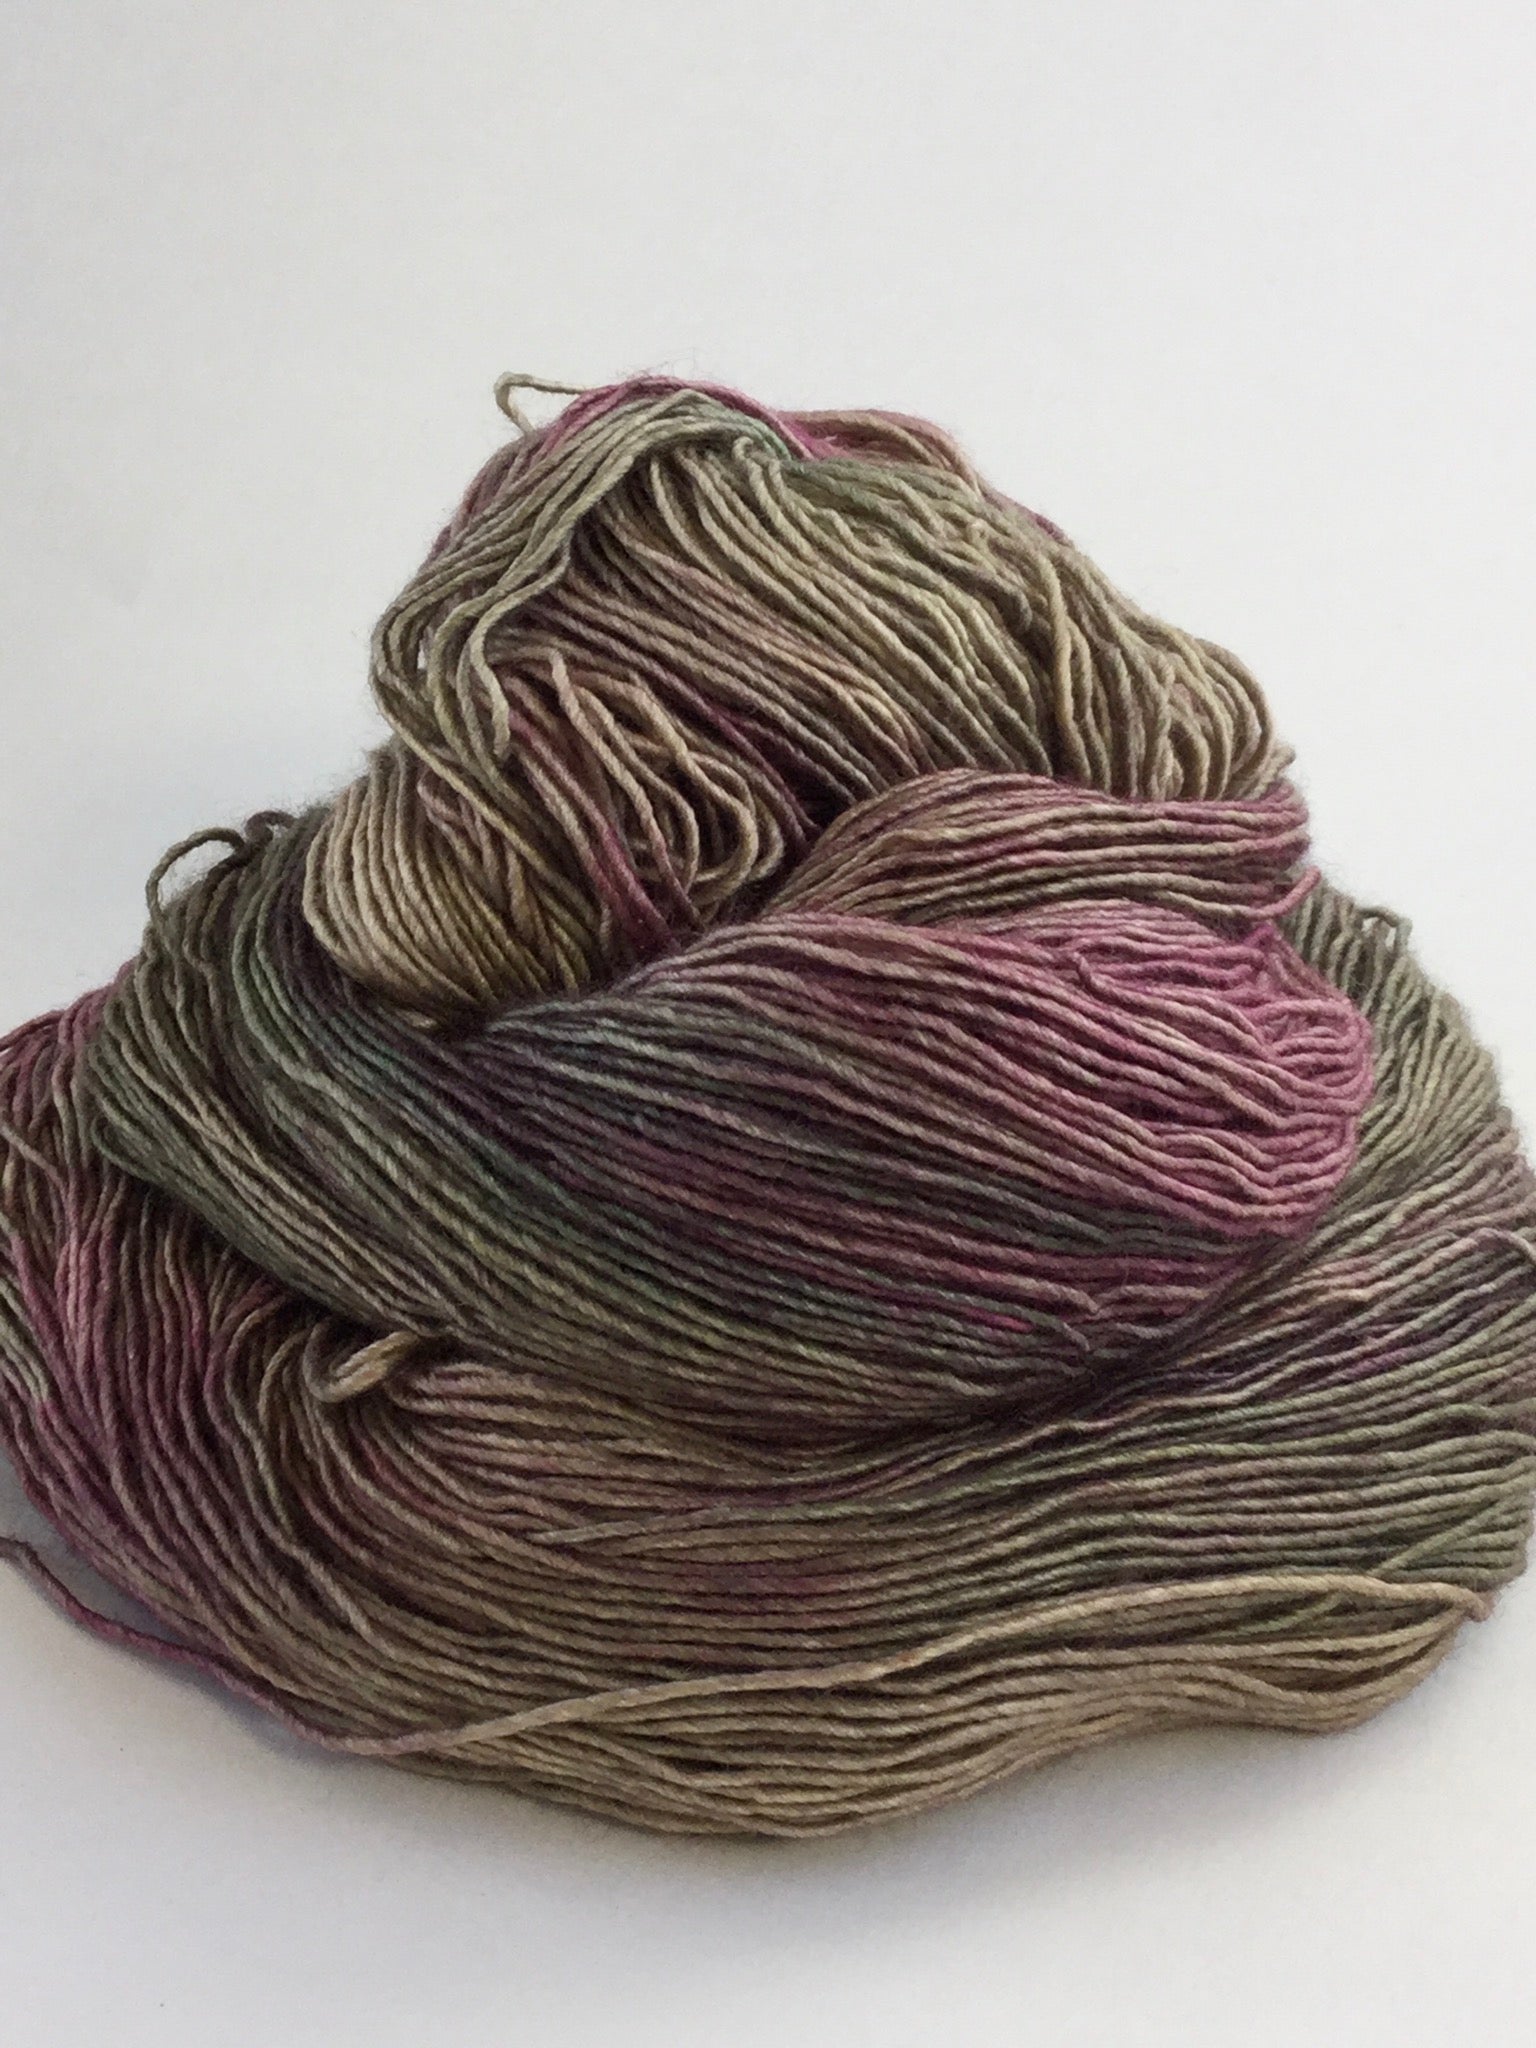 Of the Earth - River Silk and Merino